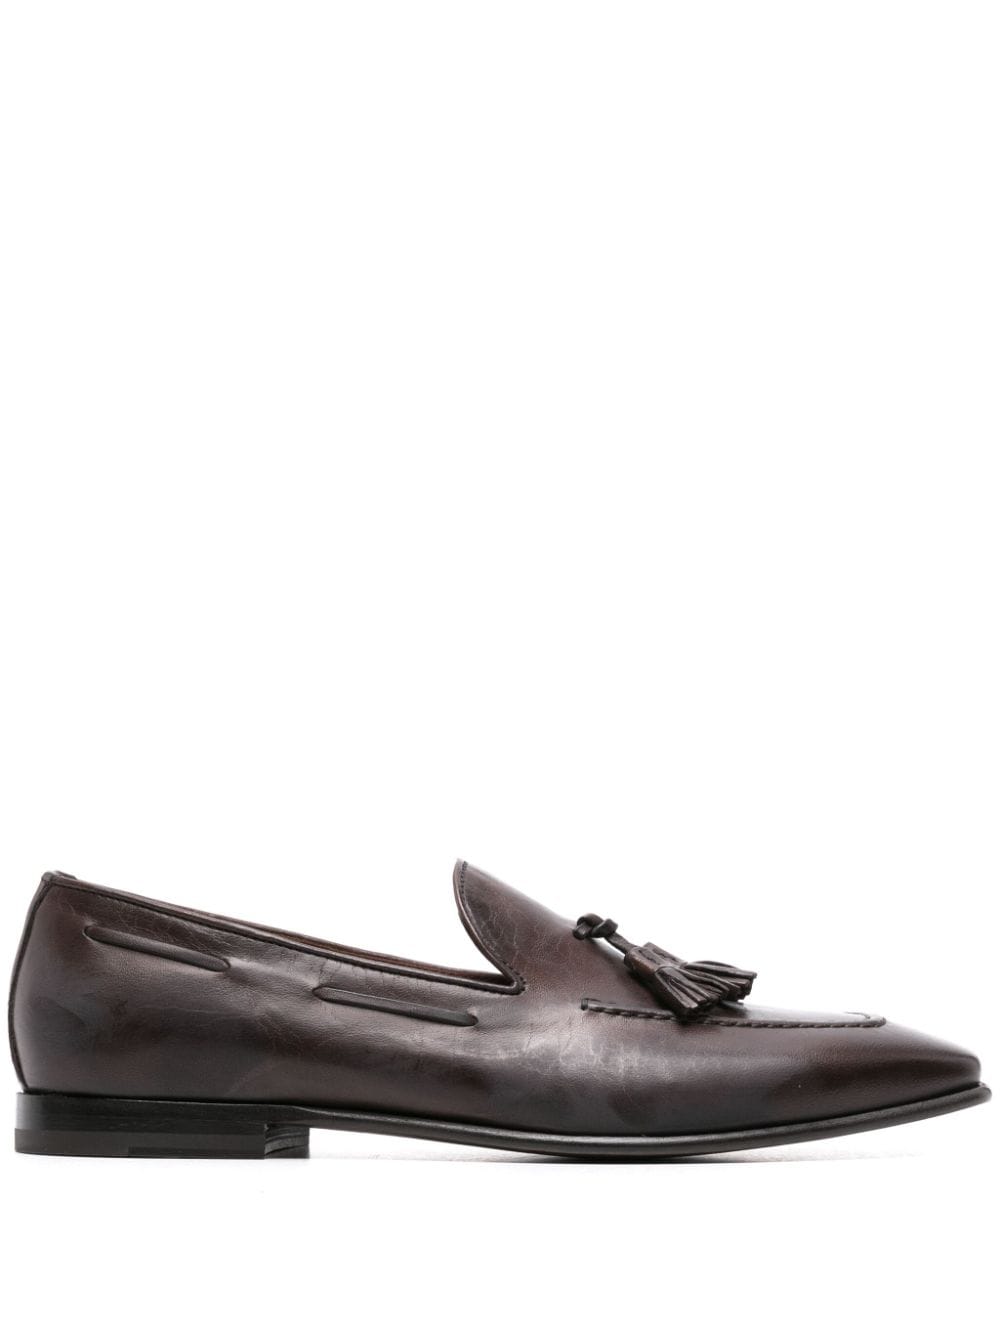 Rodolfo leather loafers